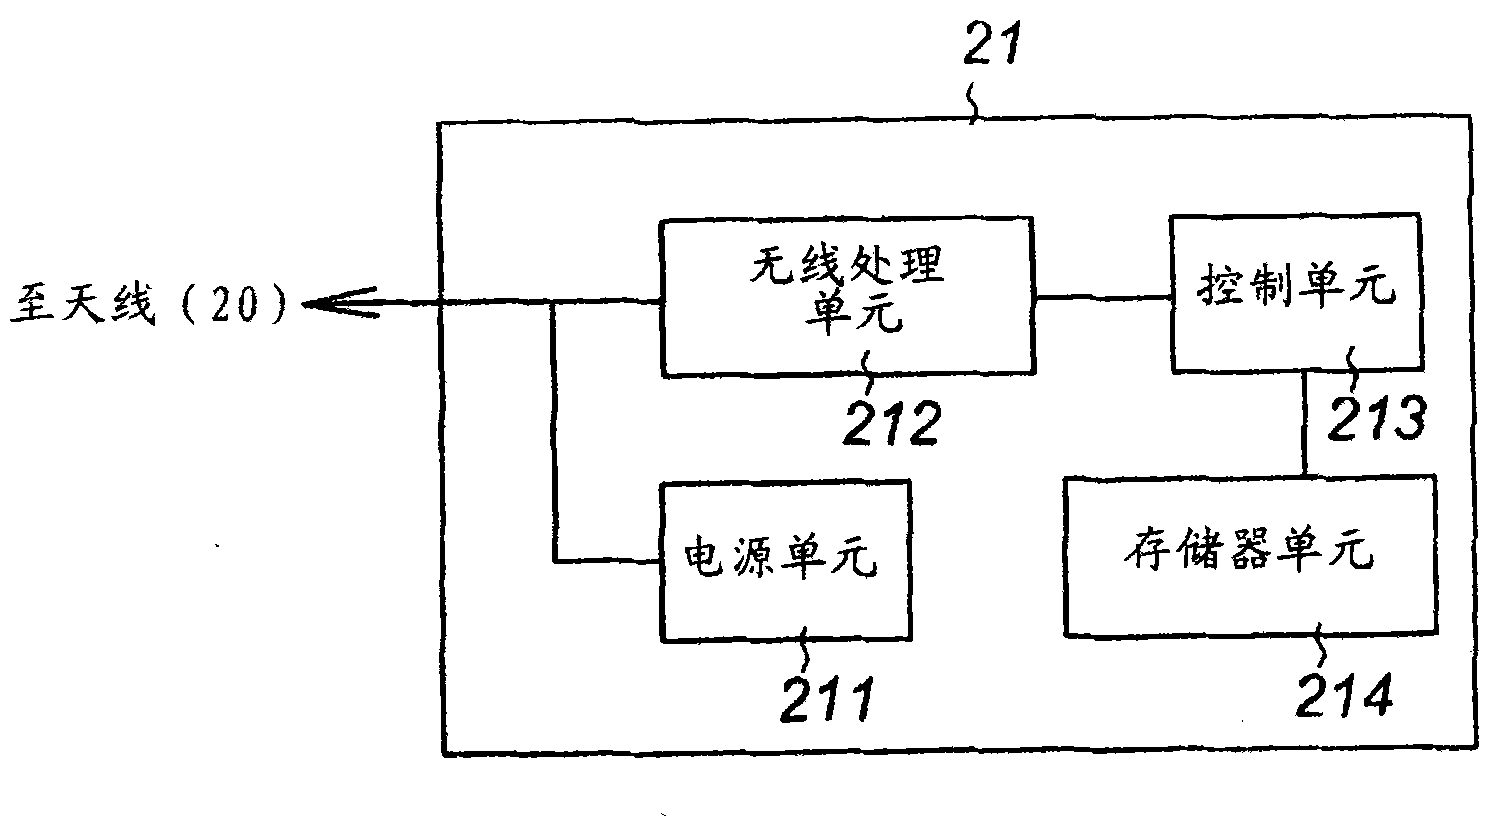 Rfid tag, and system and method for detecting change of rfid tag environment